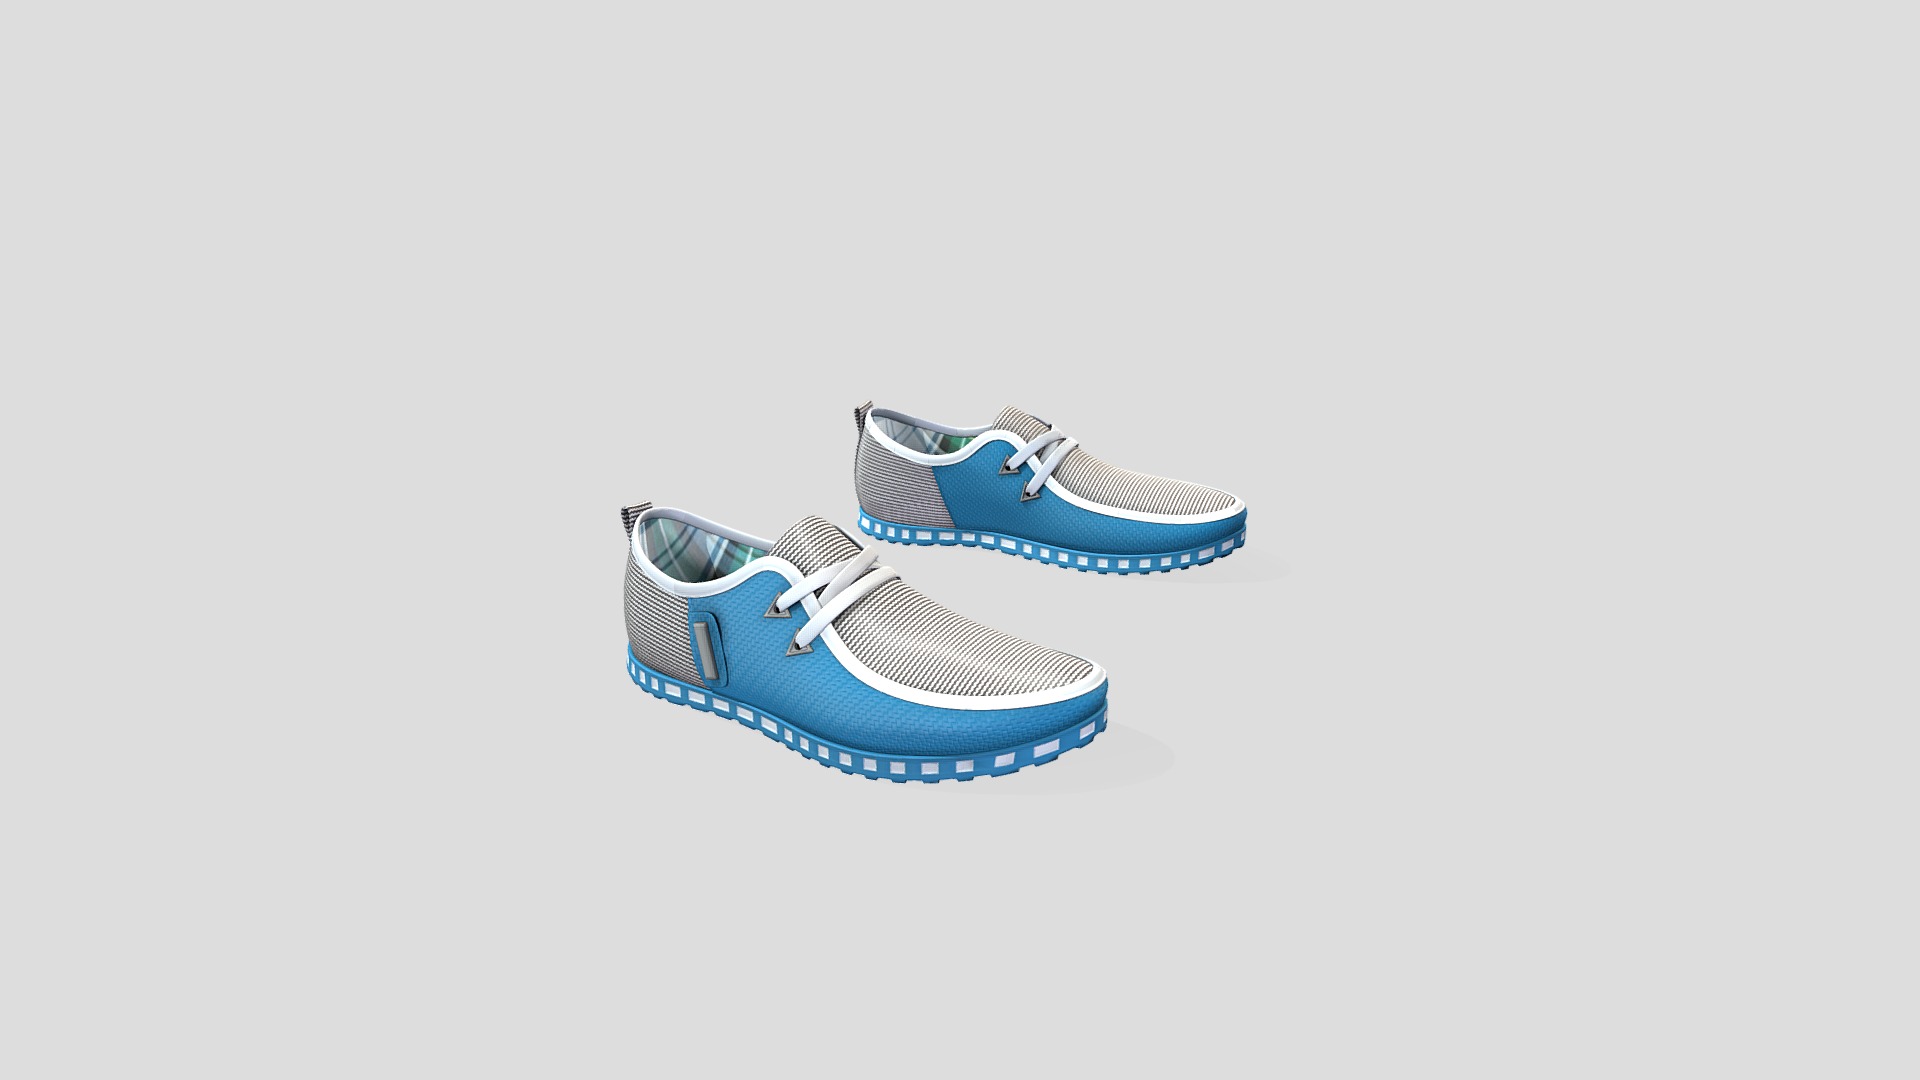 3D model Men’s Slip On Quality Casual Summer Flat Shoes - This is a 3D model of the Men's Slip On Quality Casual Summer Flat Shoes. The 3D model is about a pair of blue and white sandals.